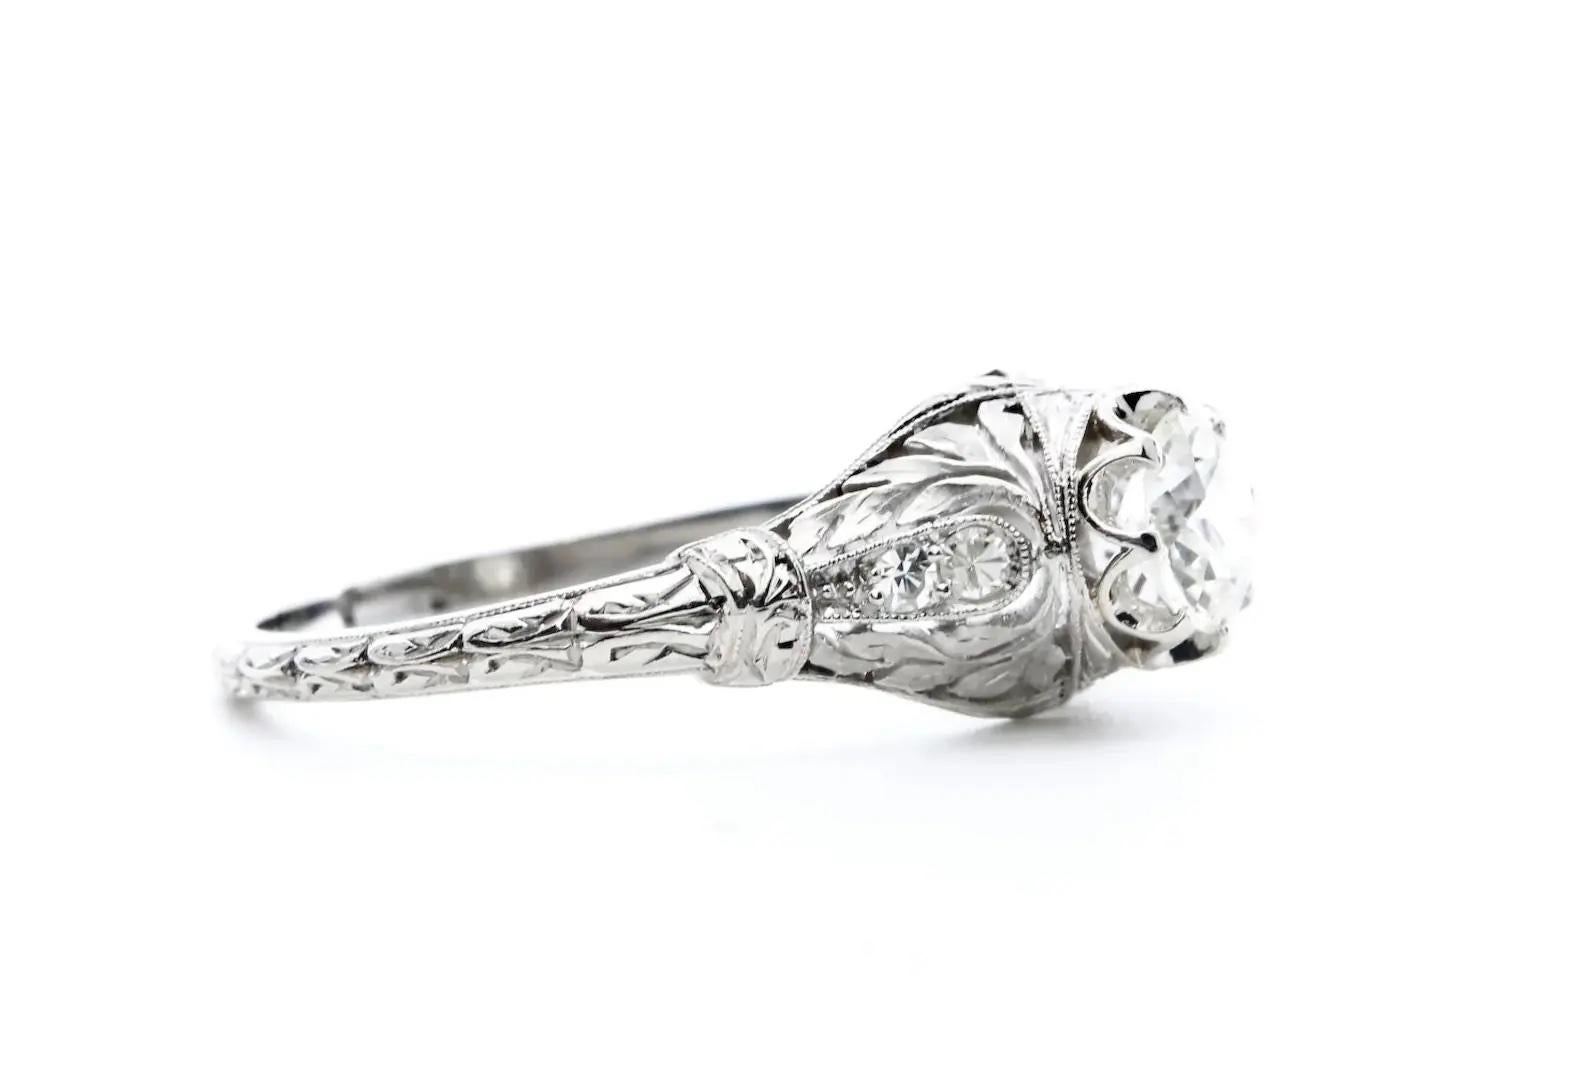 A hand engraved foliate motif Art Deco period diamond engagement ring in platinum. Centered by a 0.70 carat old European cut diamond of H color and VS2 clarity. The hand crafted mounting features leaf motif filigree work complemented by beautiful